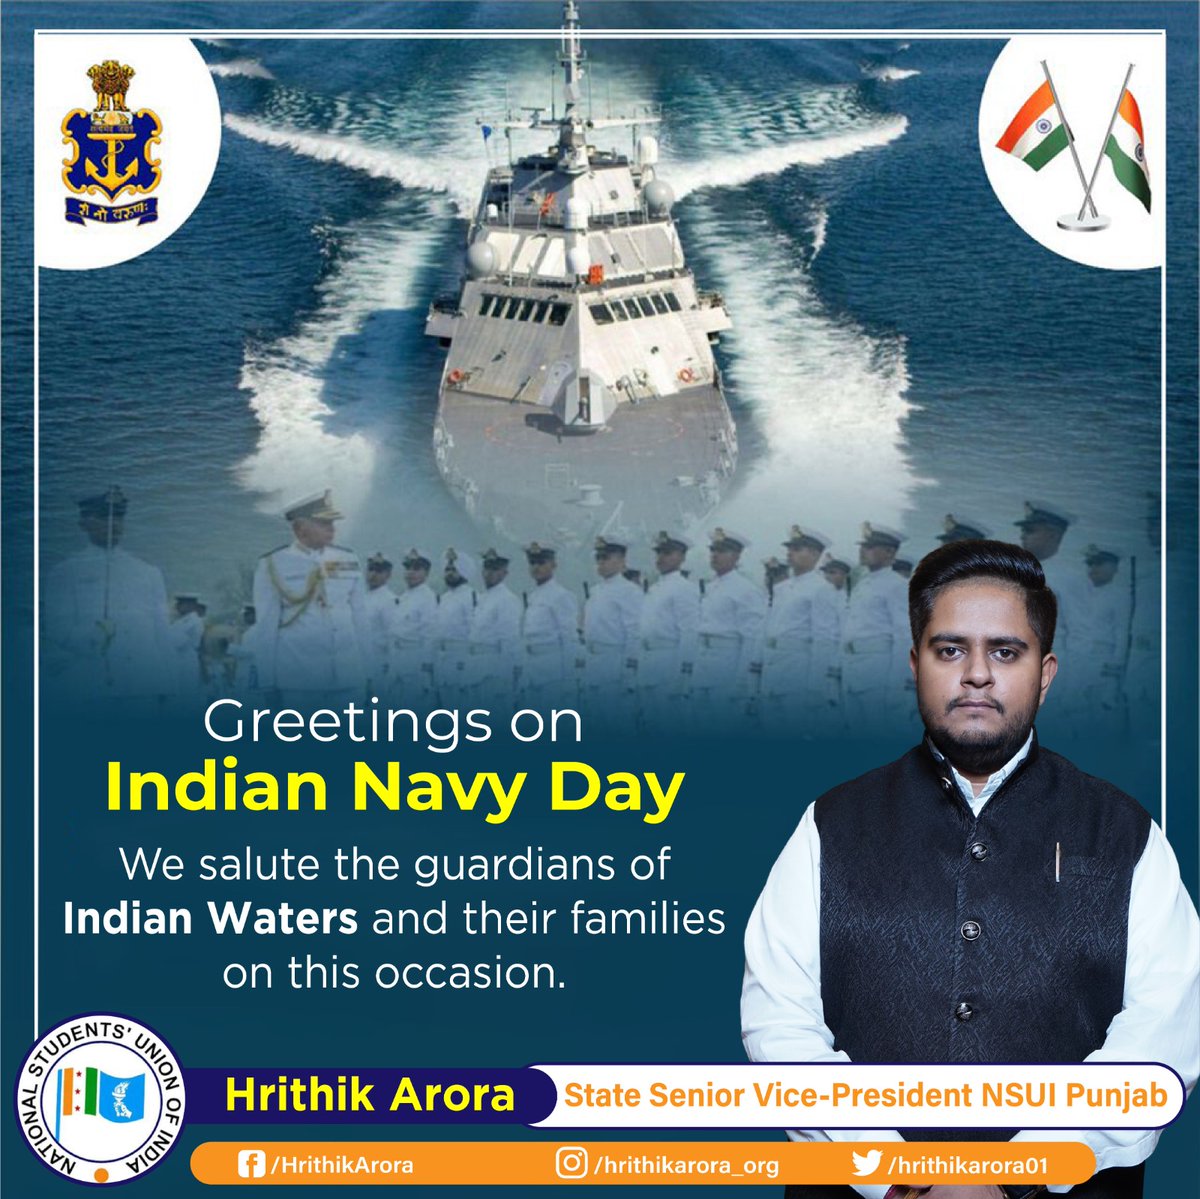 Saluting the indomitable spirit and unwavering commitment of the Indian Navy on Navy Day. Anchored in courage, sailing with pride. #IndianNavyDay ⚓

#NavyPride #MaritimeMight #DefendersAtSea #NavalExcellence #ServingWithHonour